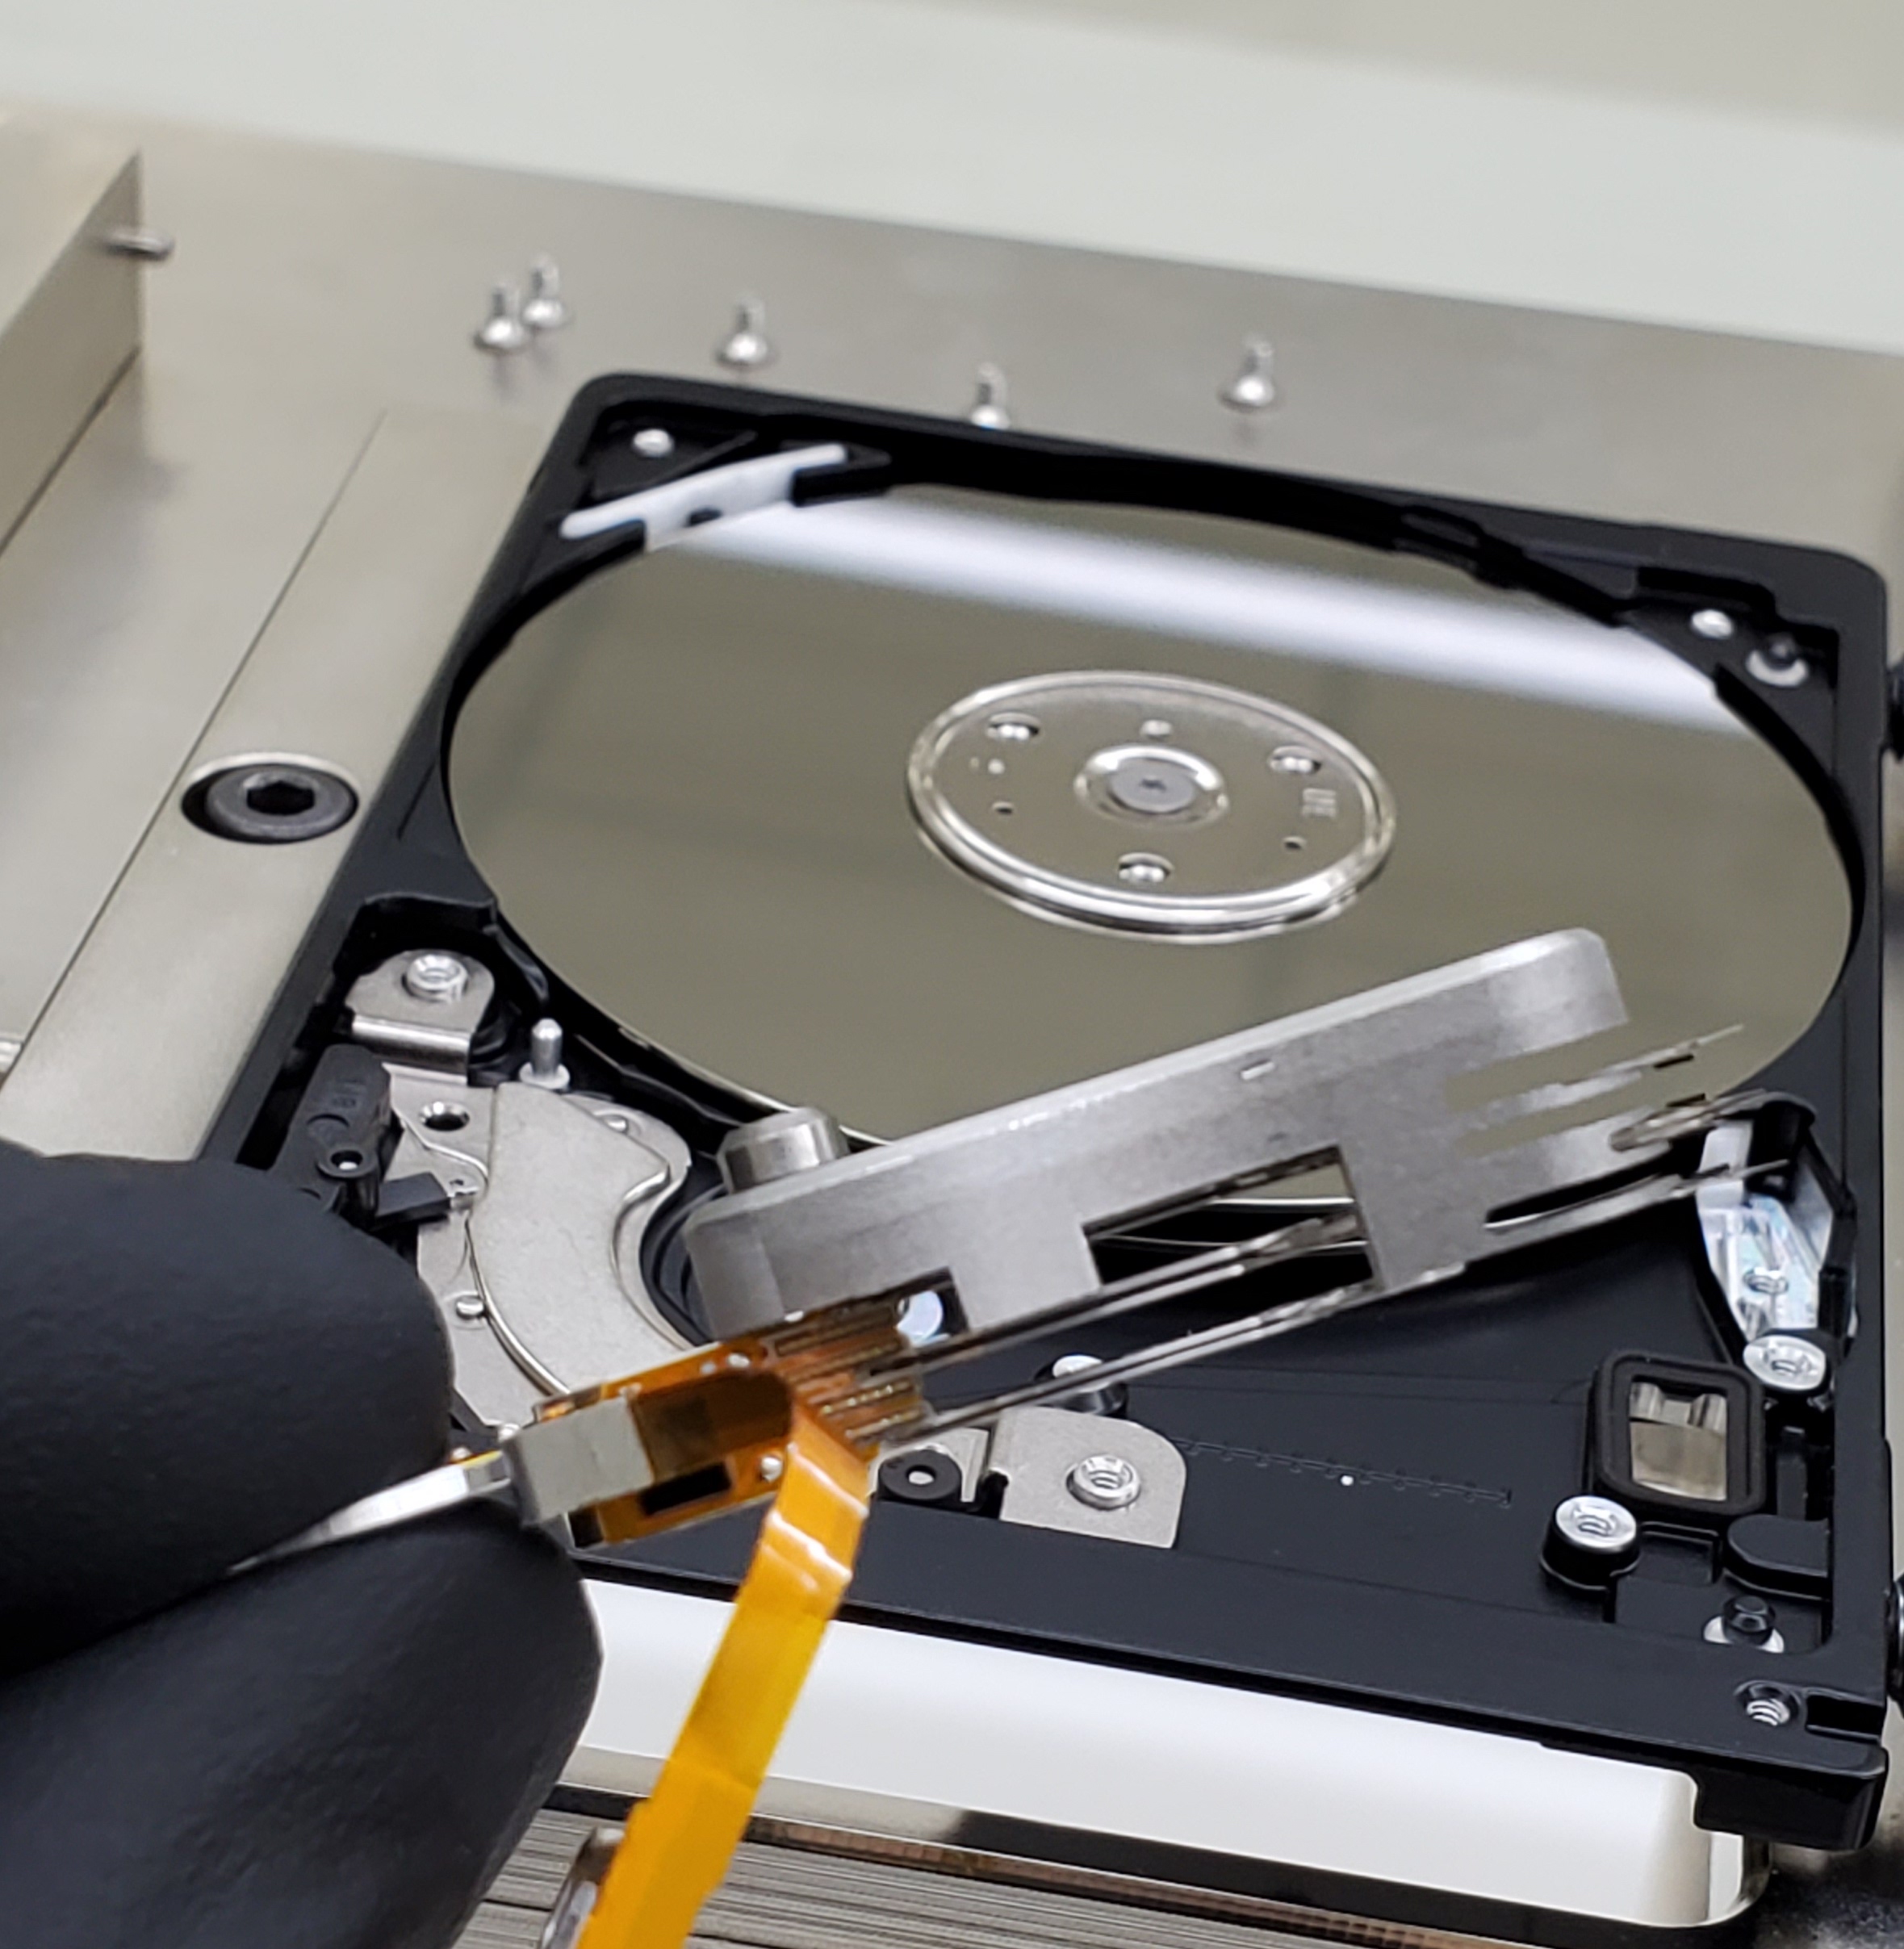 seagate external hard drive data recovery